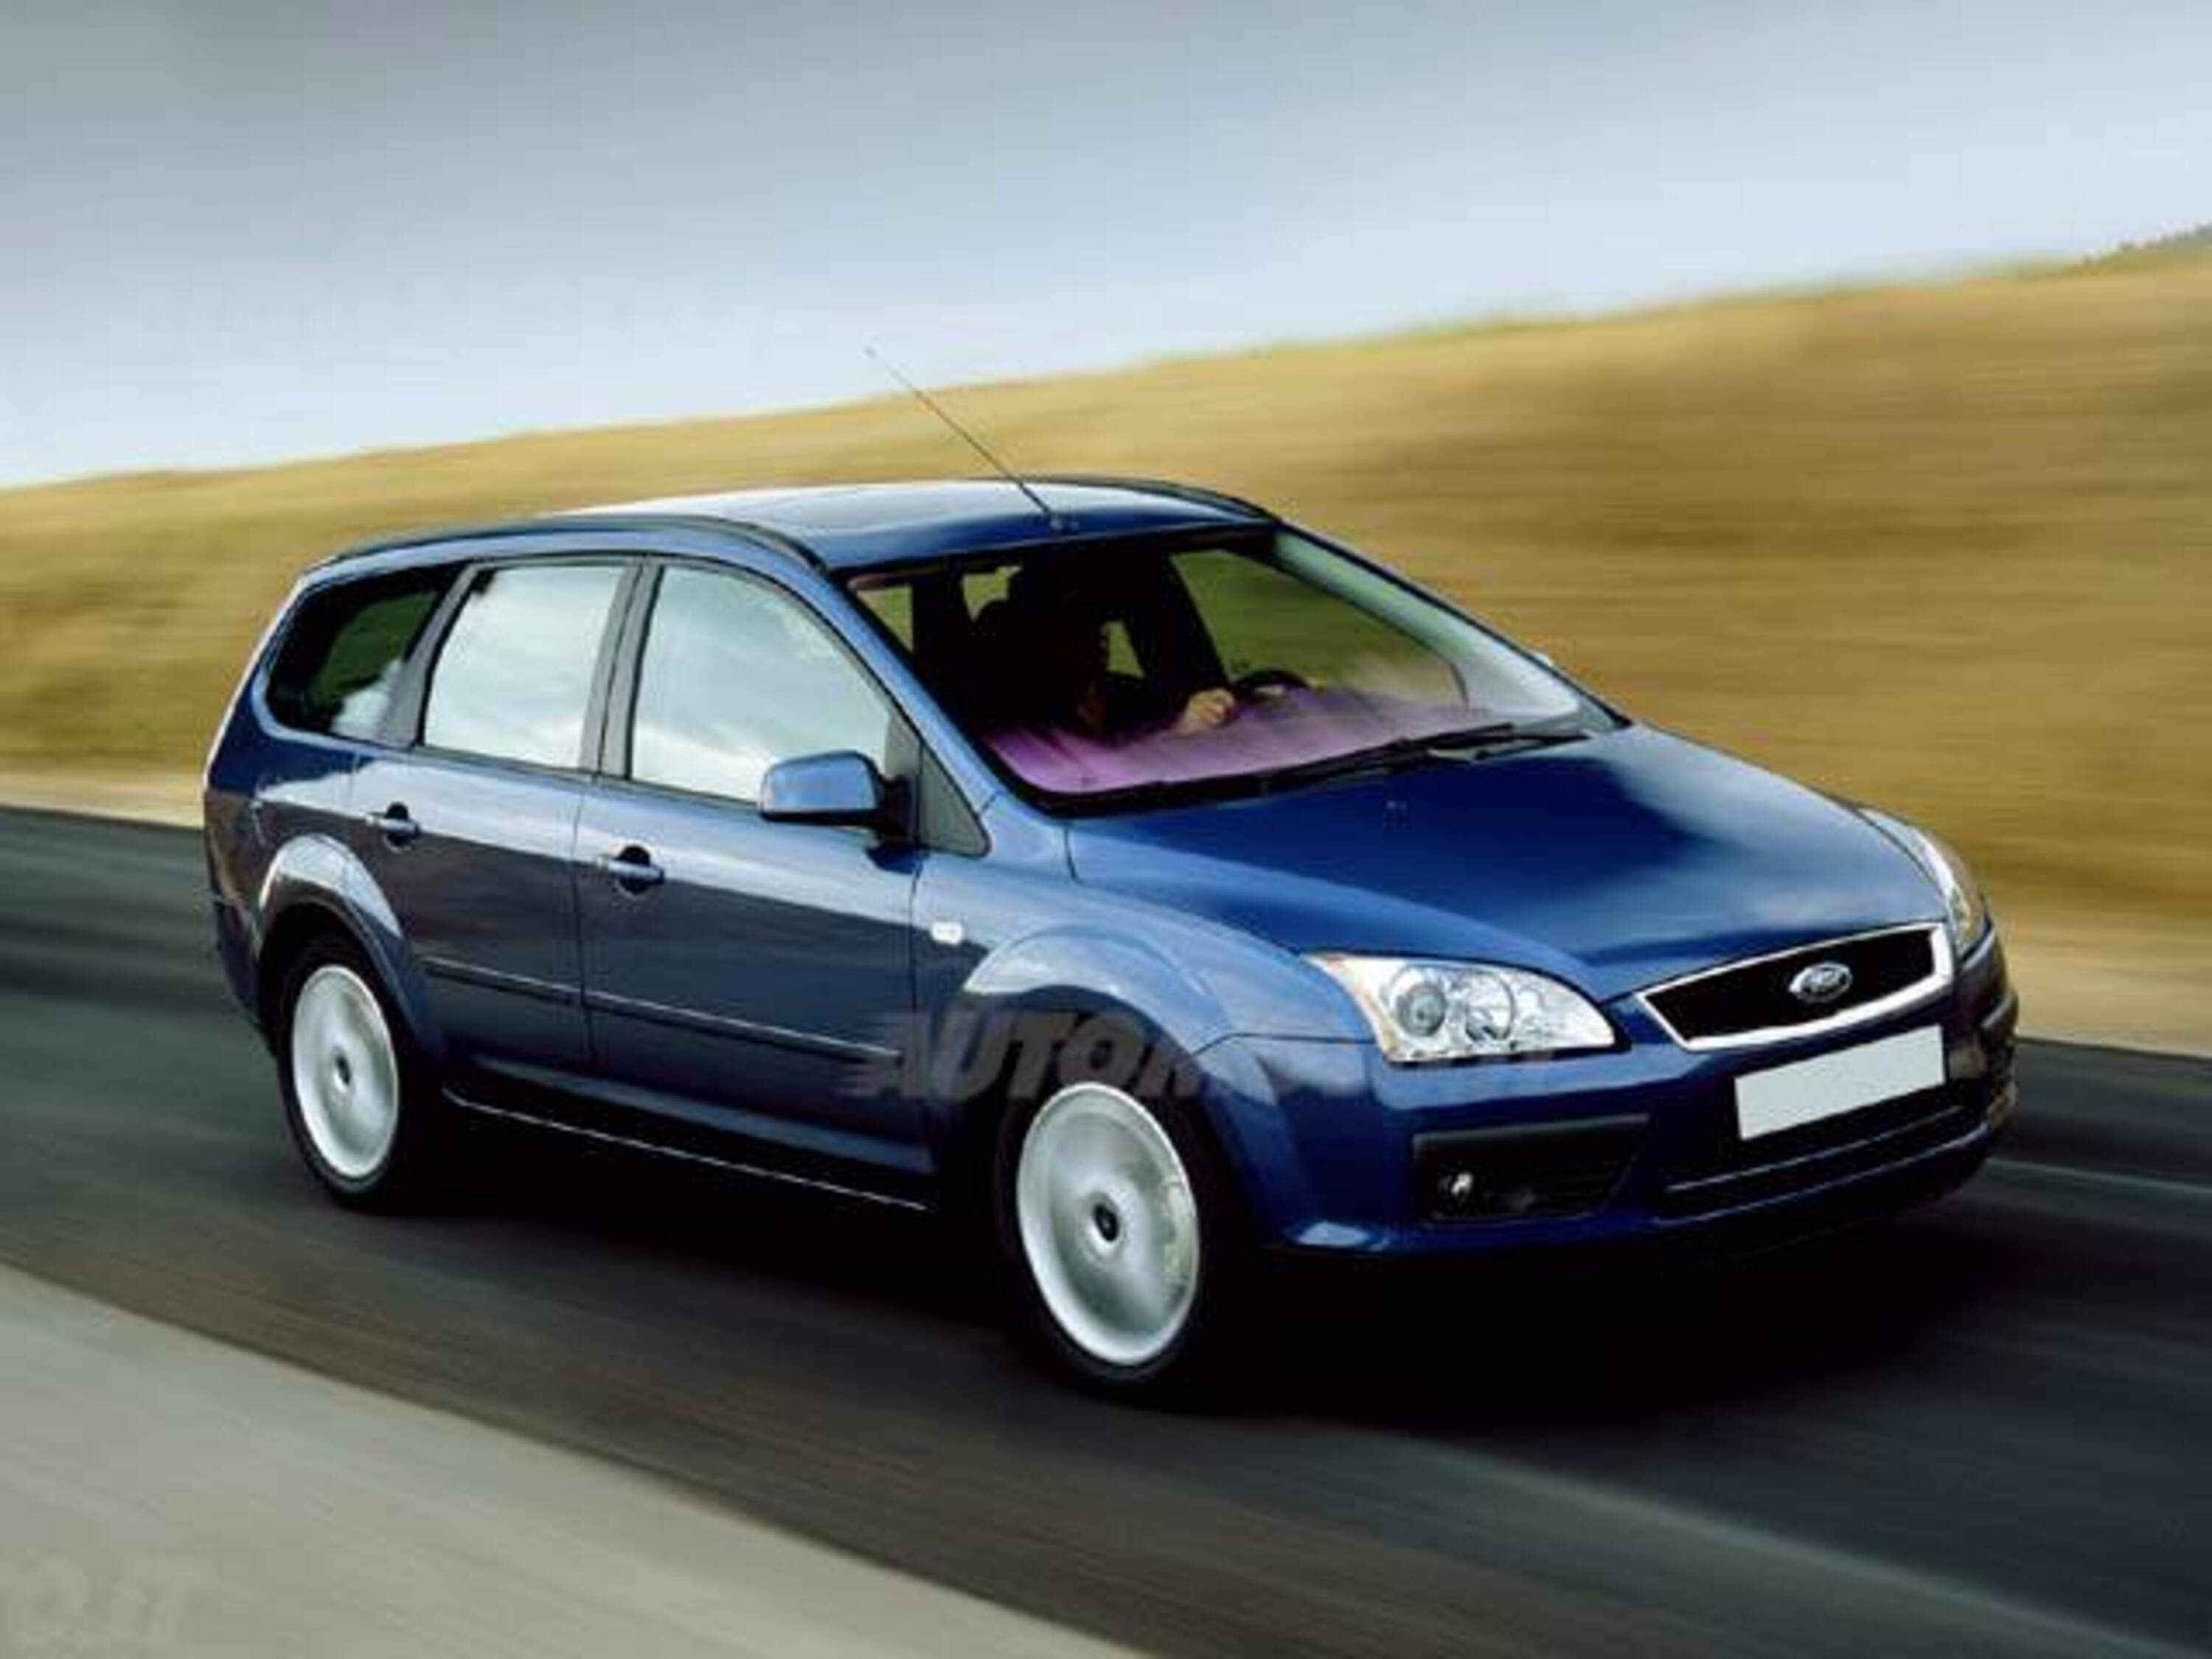 Ford Focus Station Wagon 1.6 Ti-VCT (115CV) S.W. 